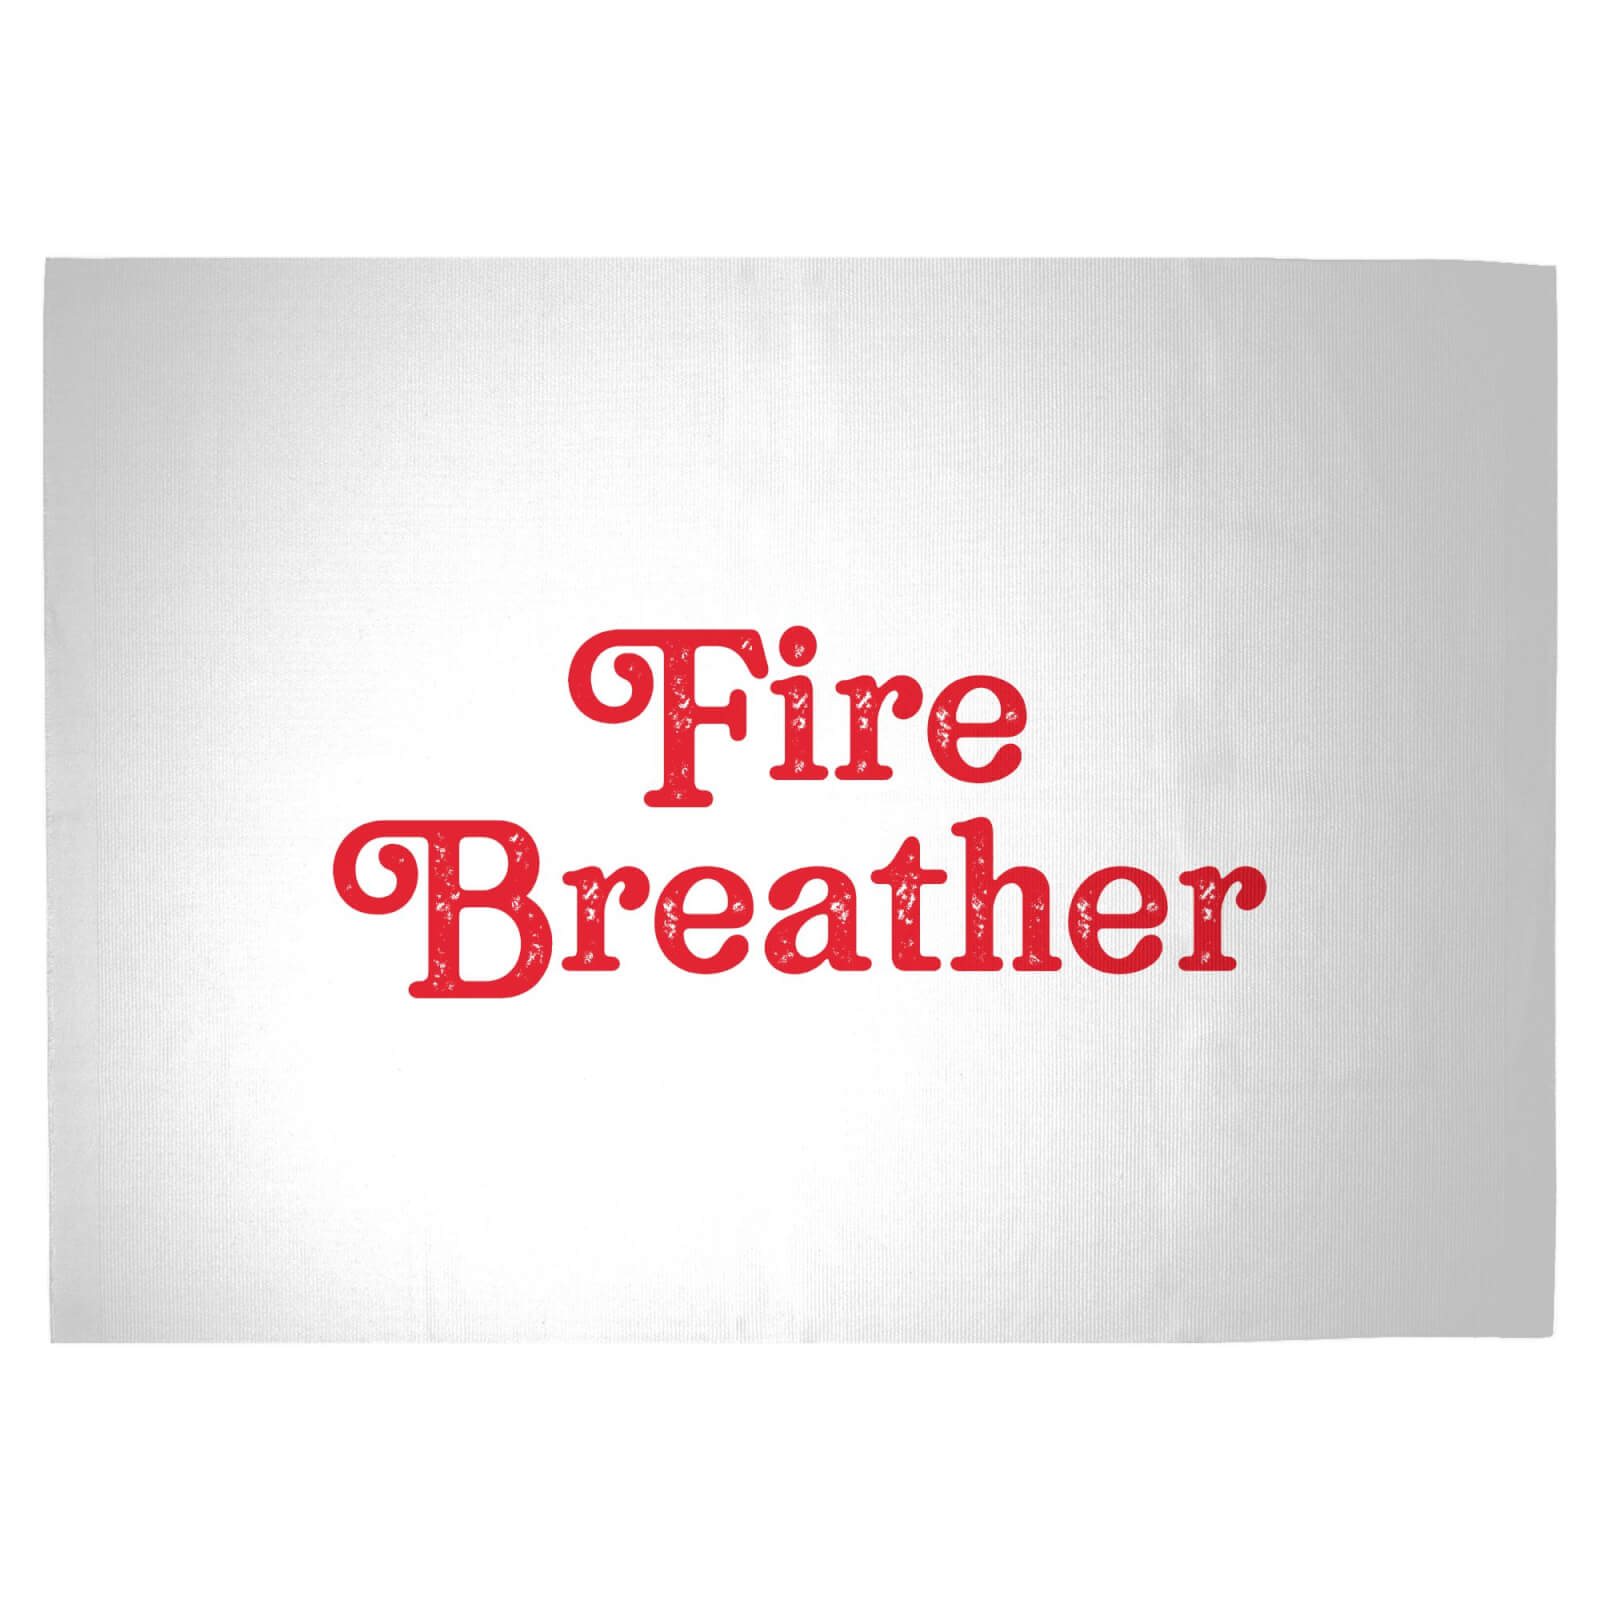 Fire Breather Woven Rug - Large